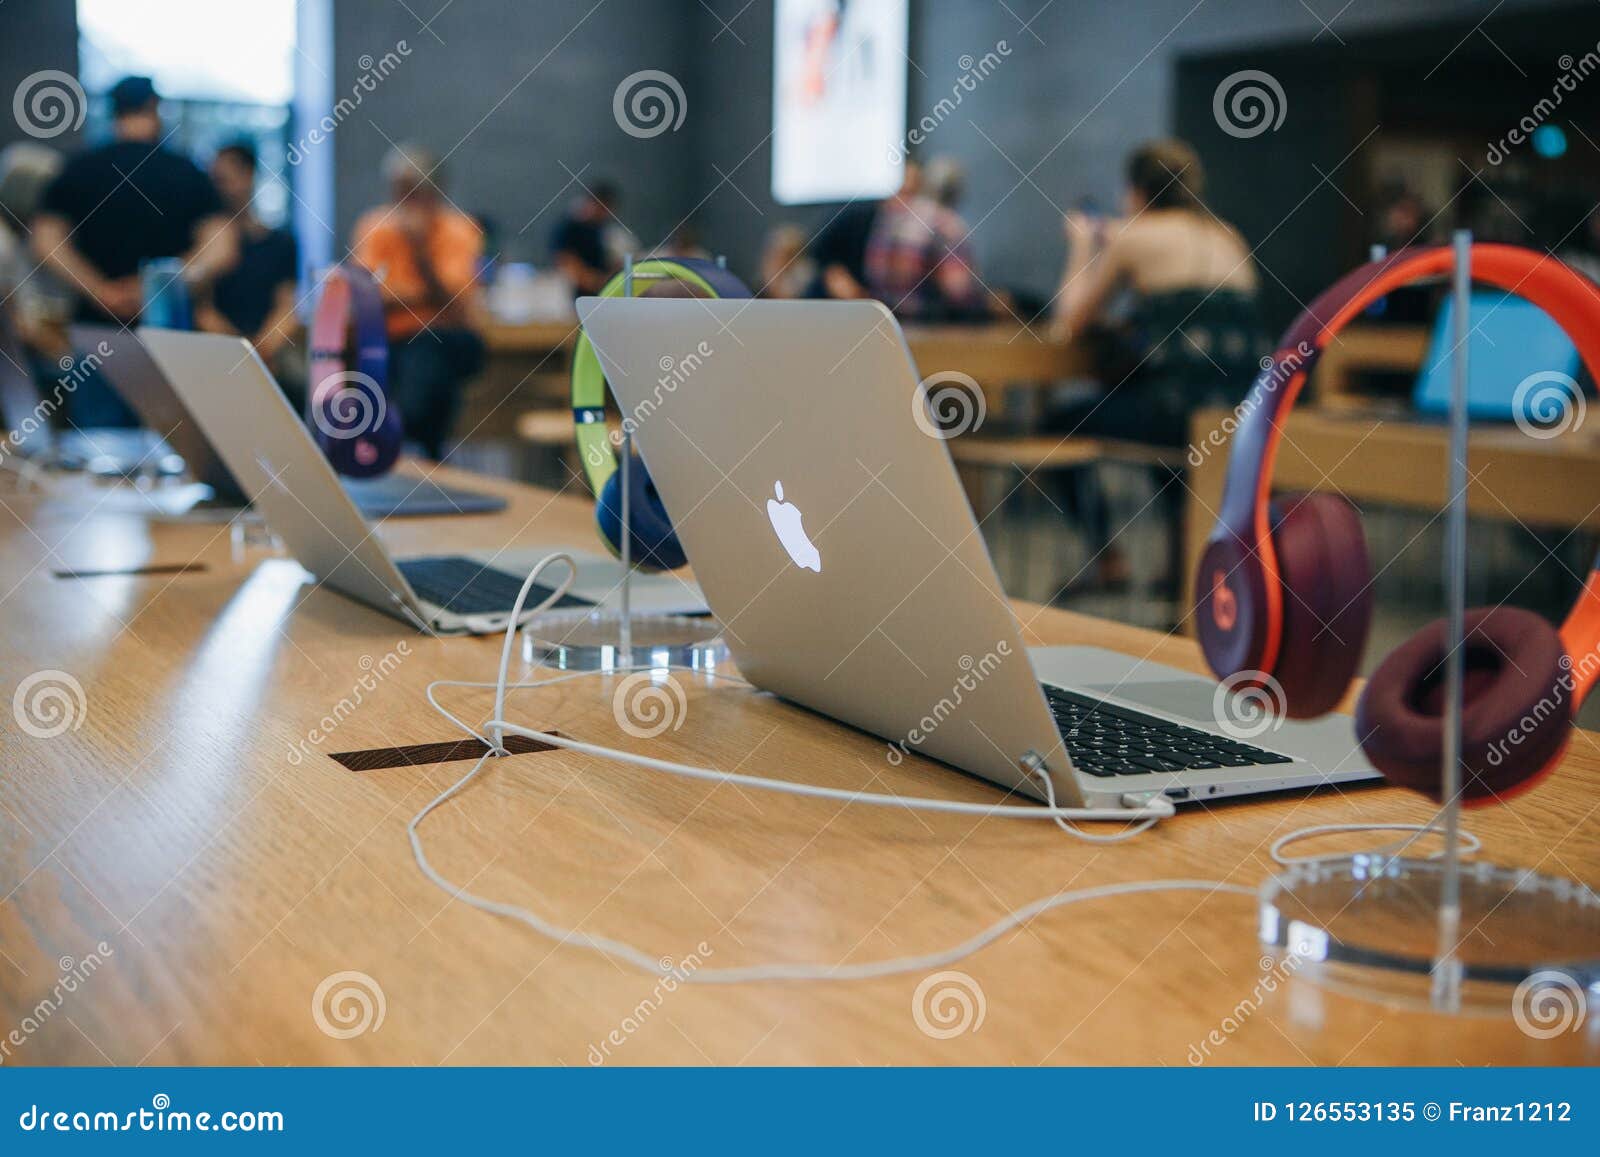 Retail Sale Of New Macbooks In The Official Store Of Apple In